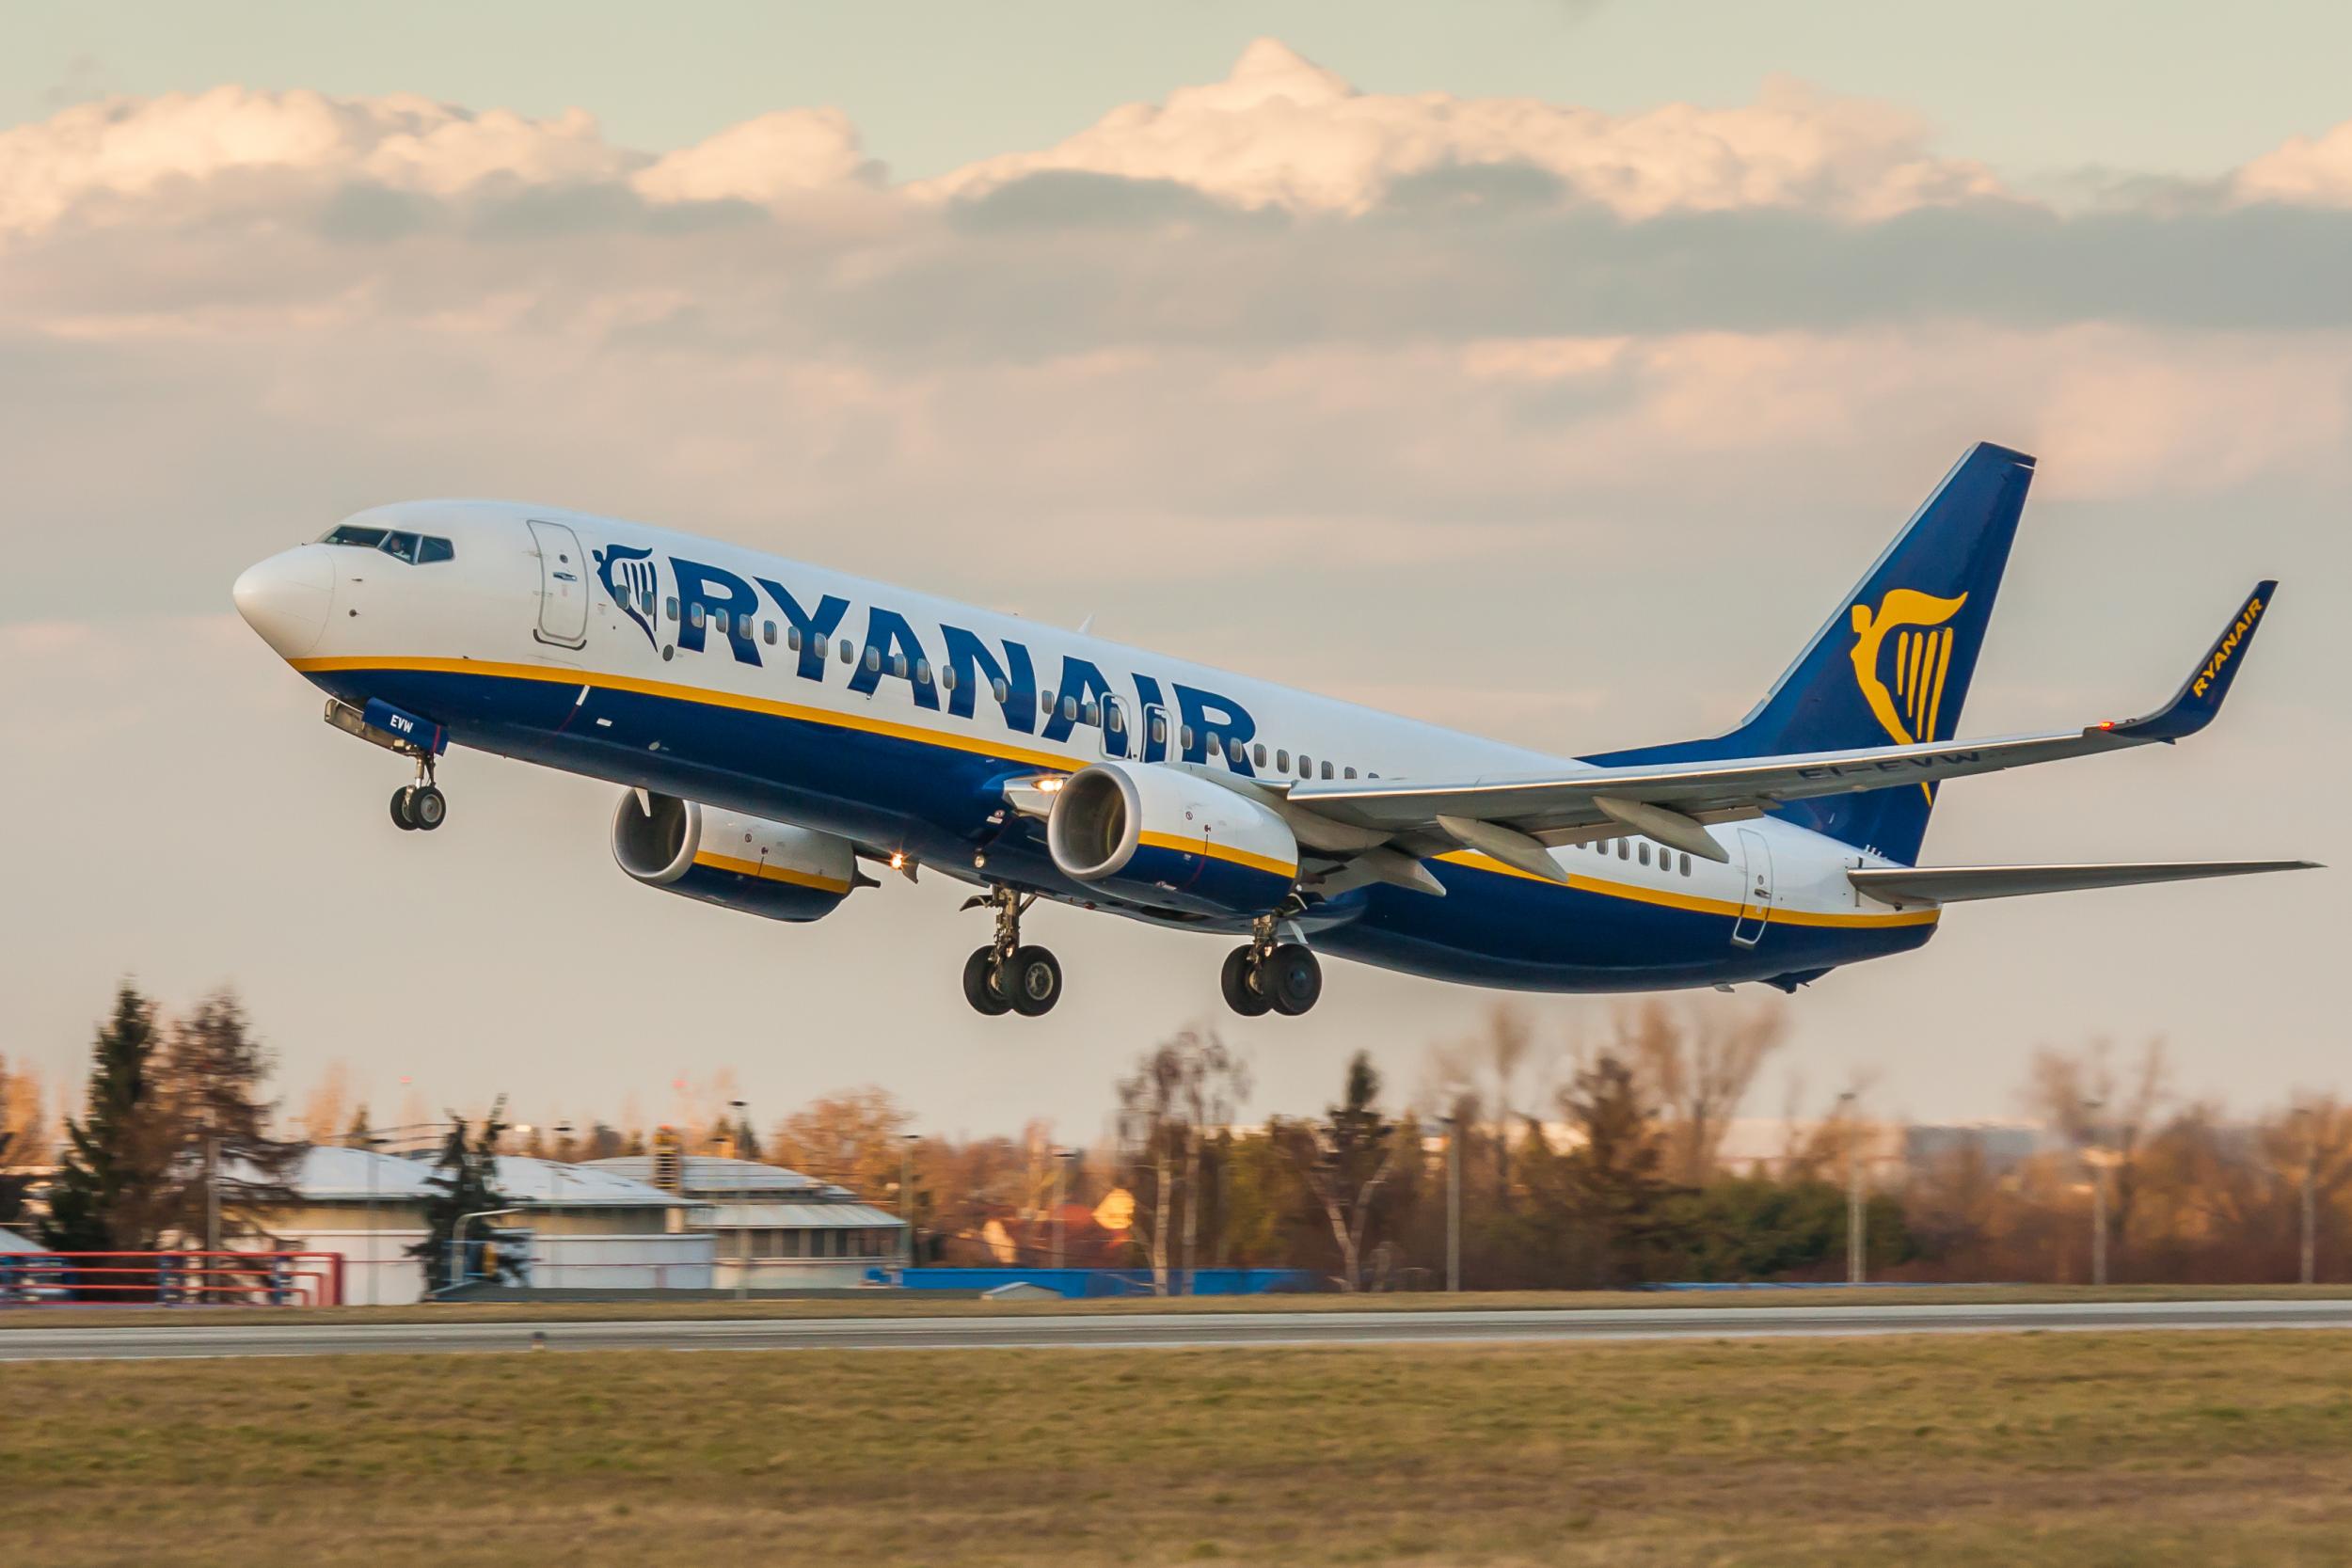 Ryanair pilots in Germany will walk out tomorrow, 12 September, for 24 hours